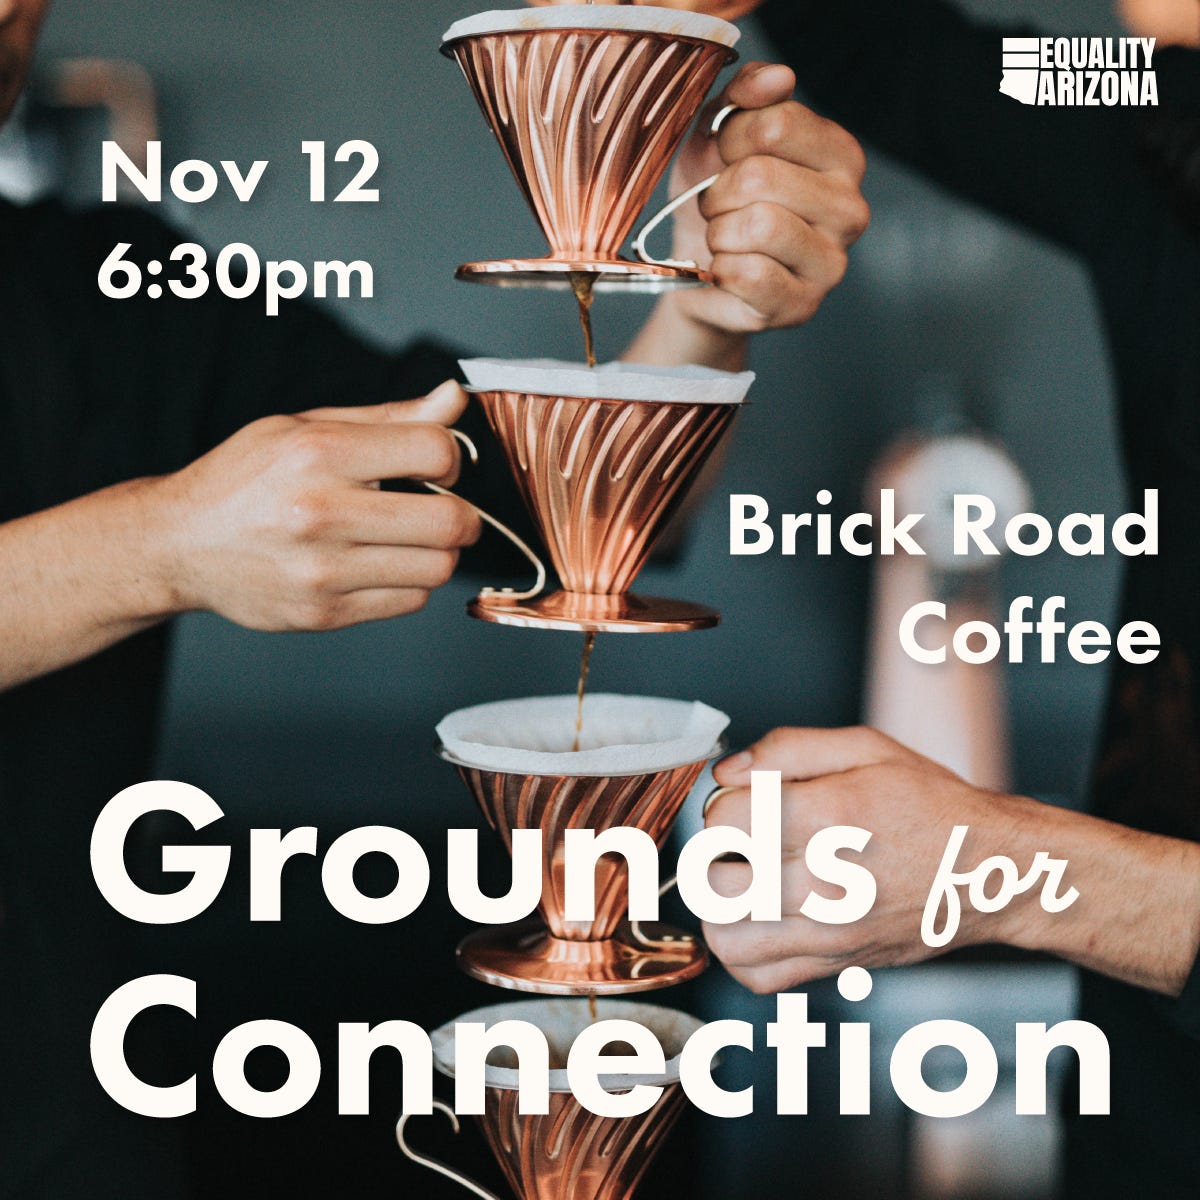 Grounds for Connection. Nov 12. 6:30. Brick Road Coffee